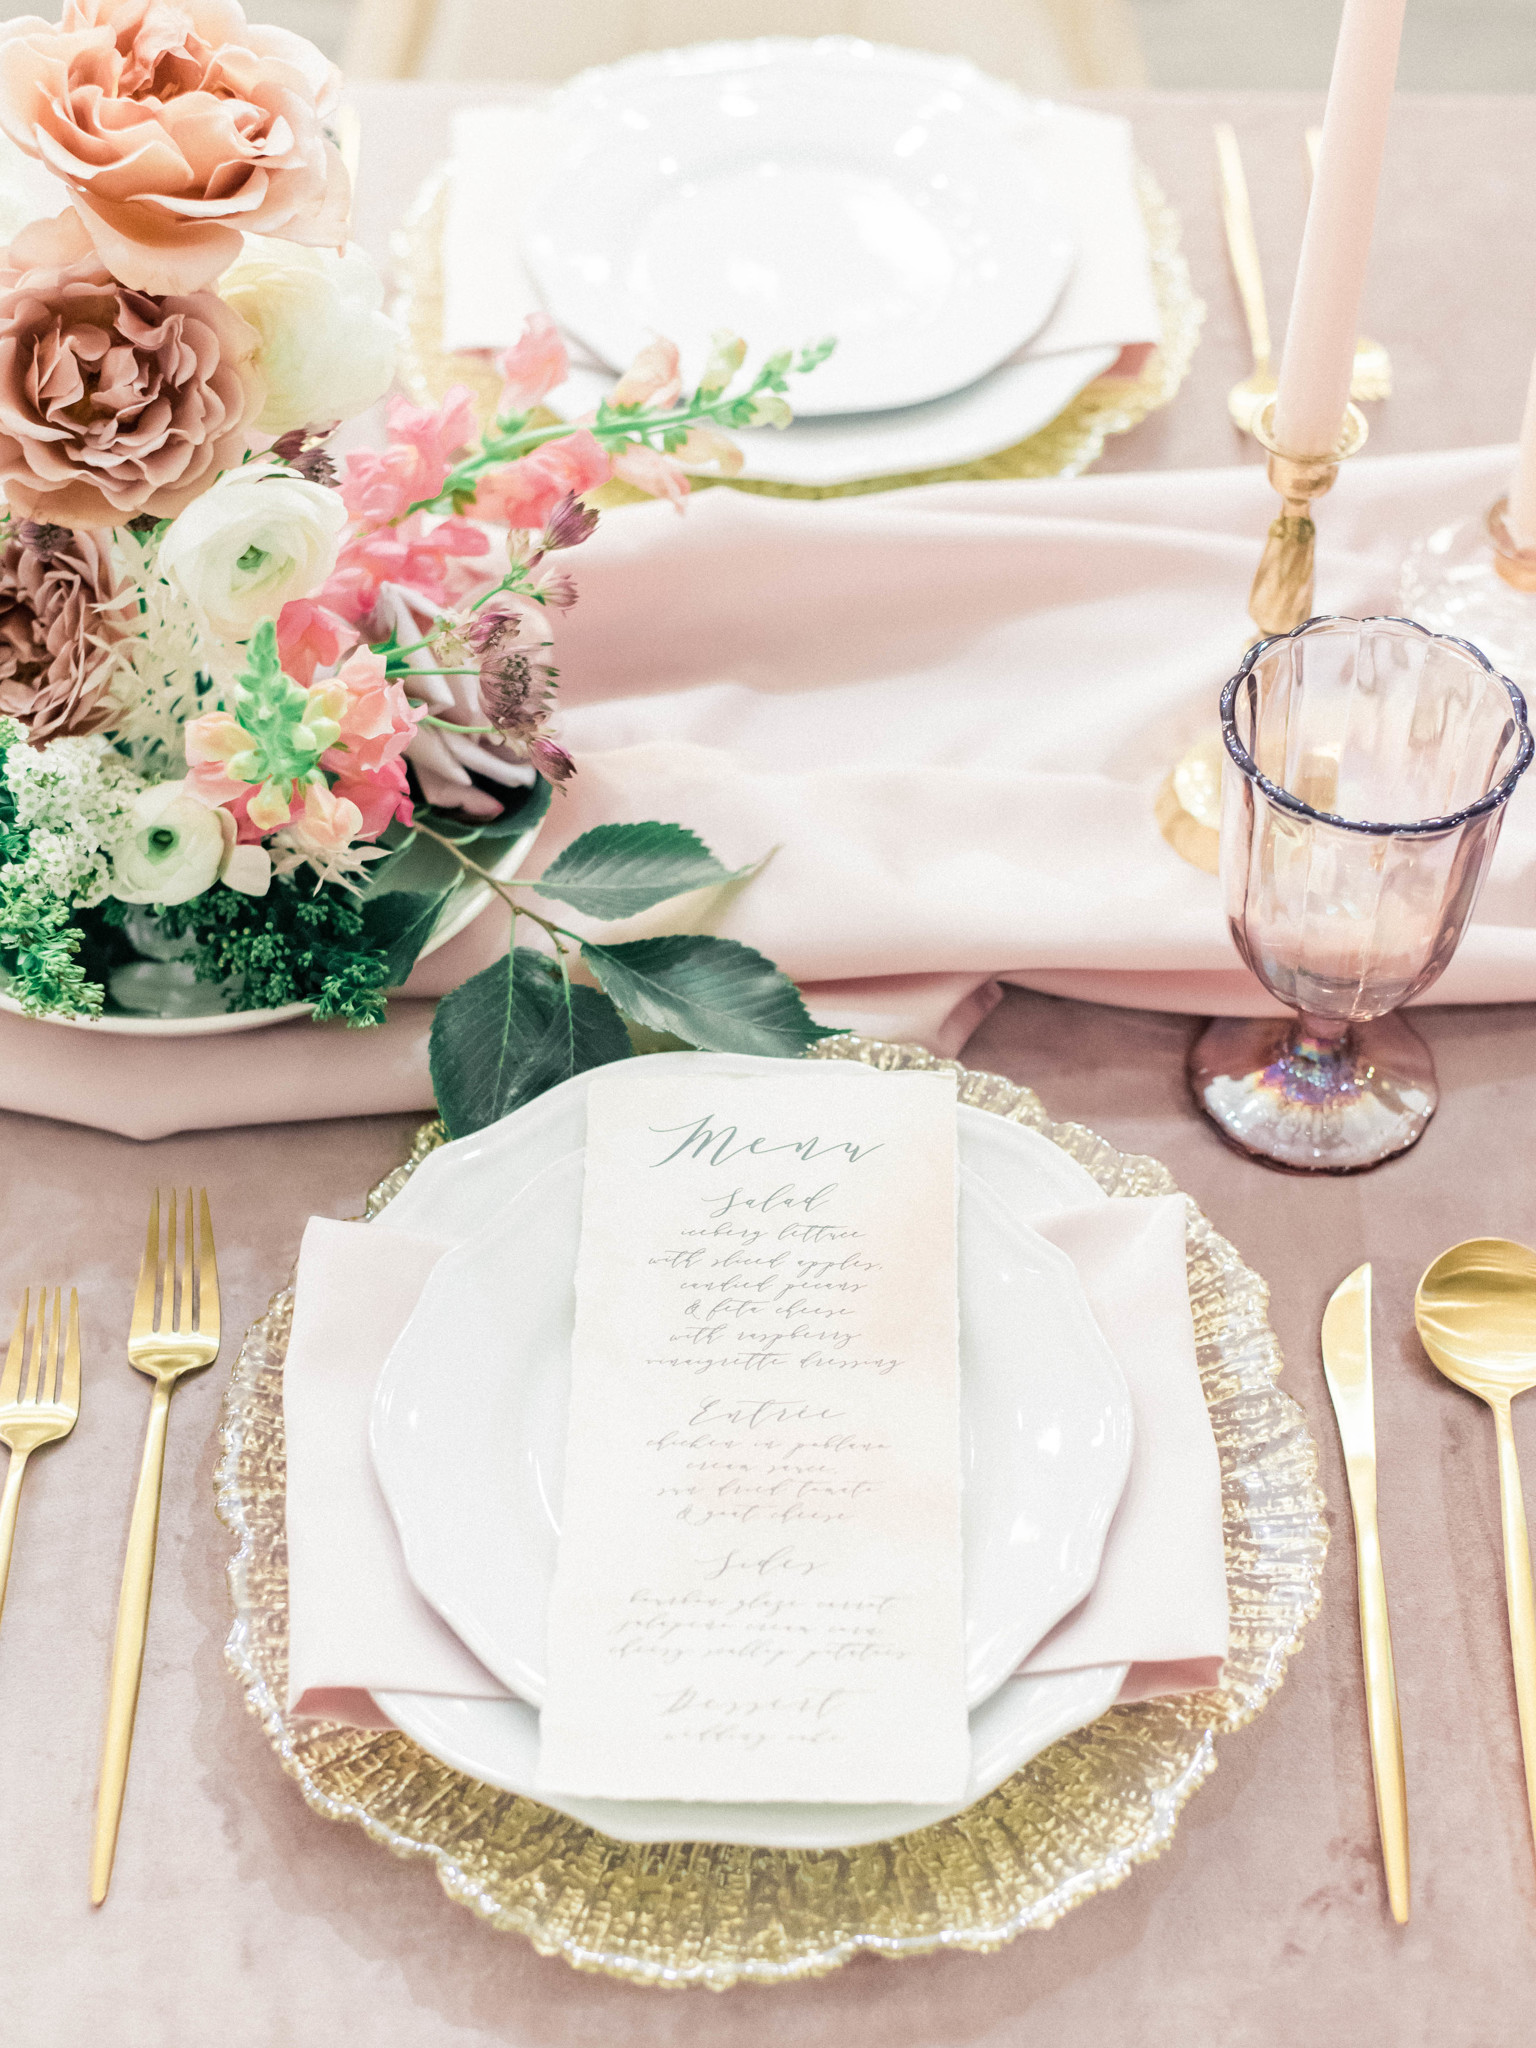 Mauve and gold wedding table setting: Whimsical mauve wedding inspiration on Alexa Kay Events. See more romantic wedding ideas at alexakayevents.com!